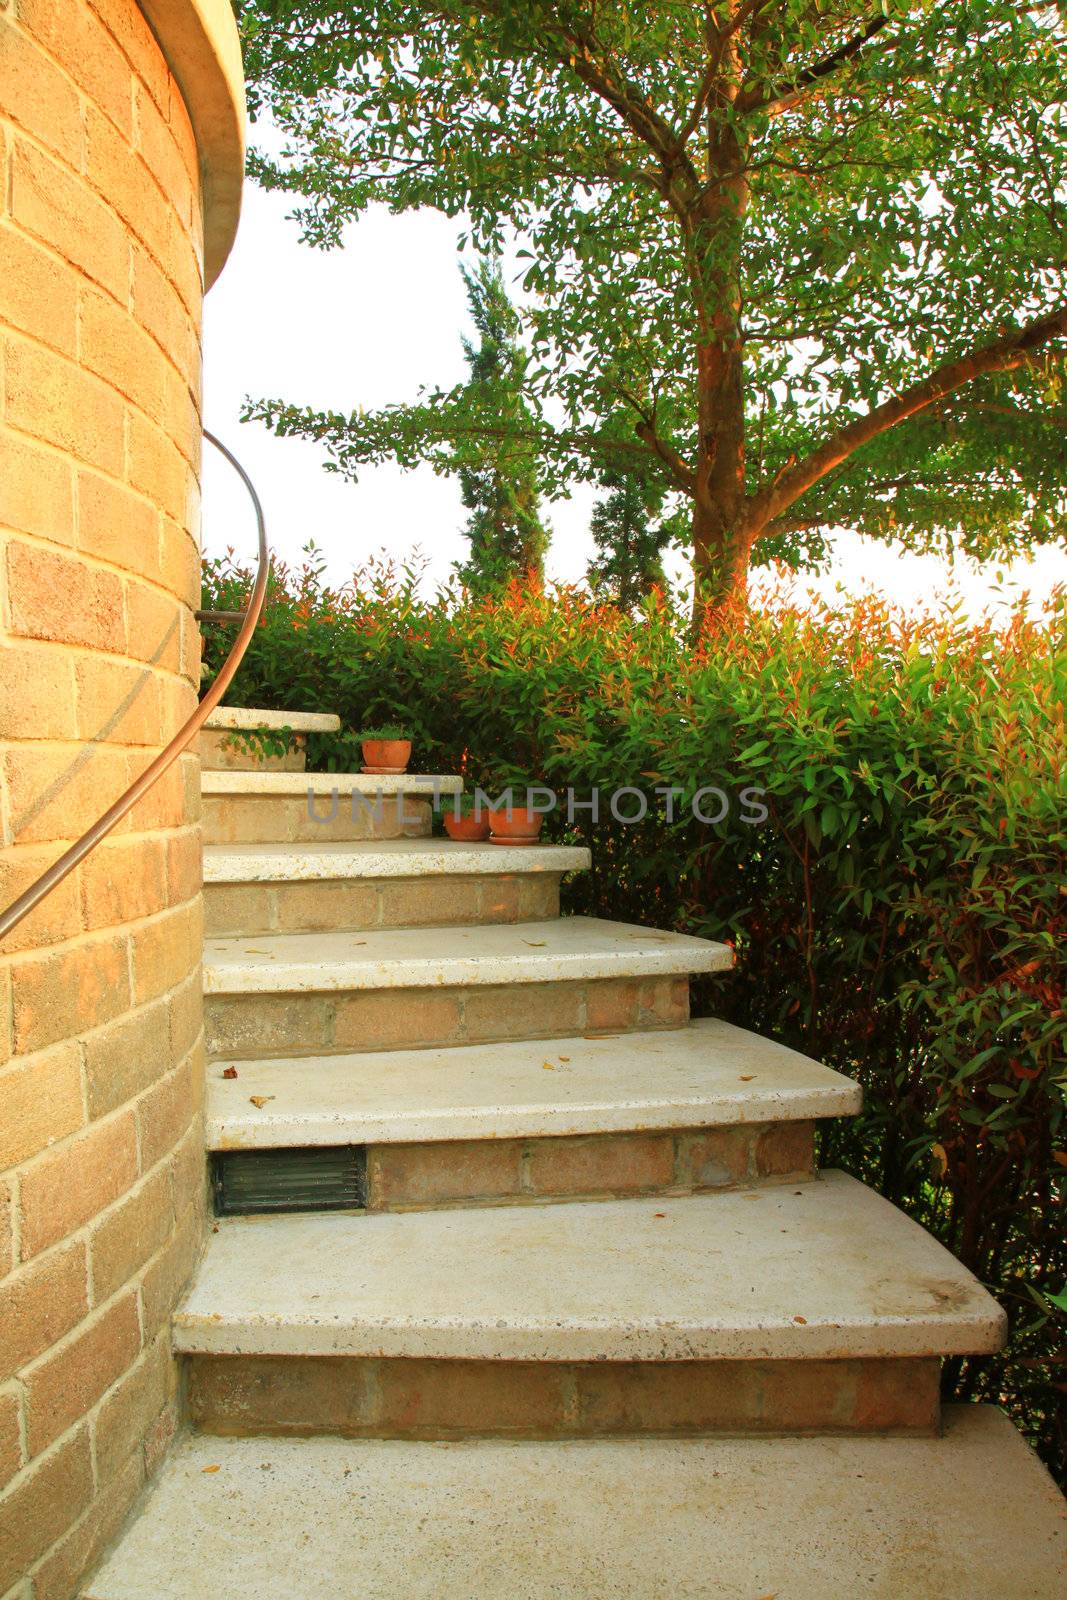 Staircase with flower and tree in garden